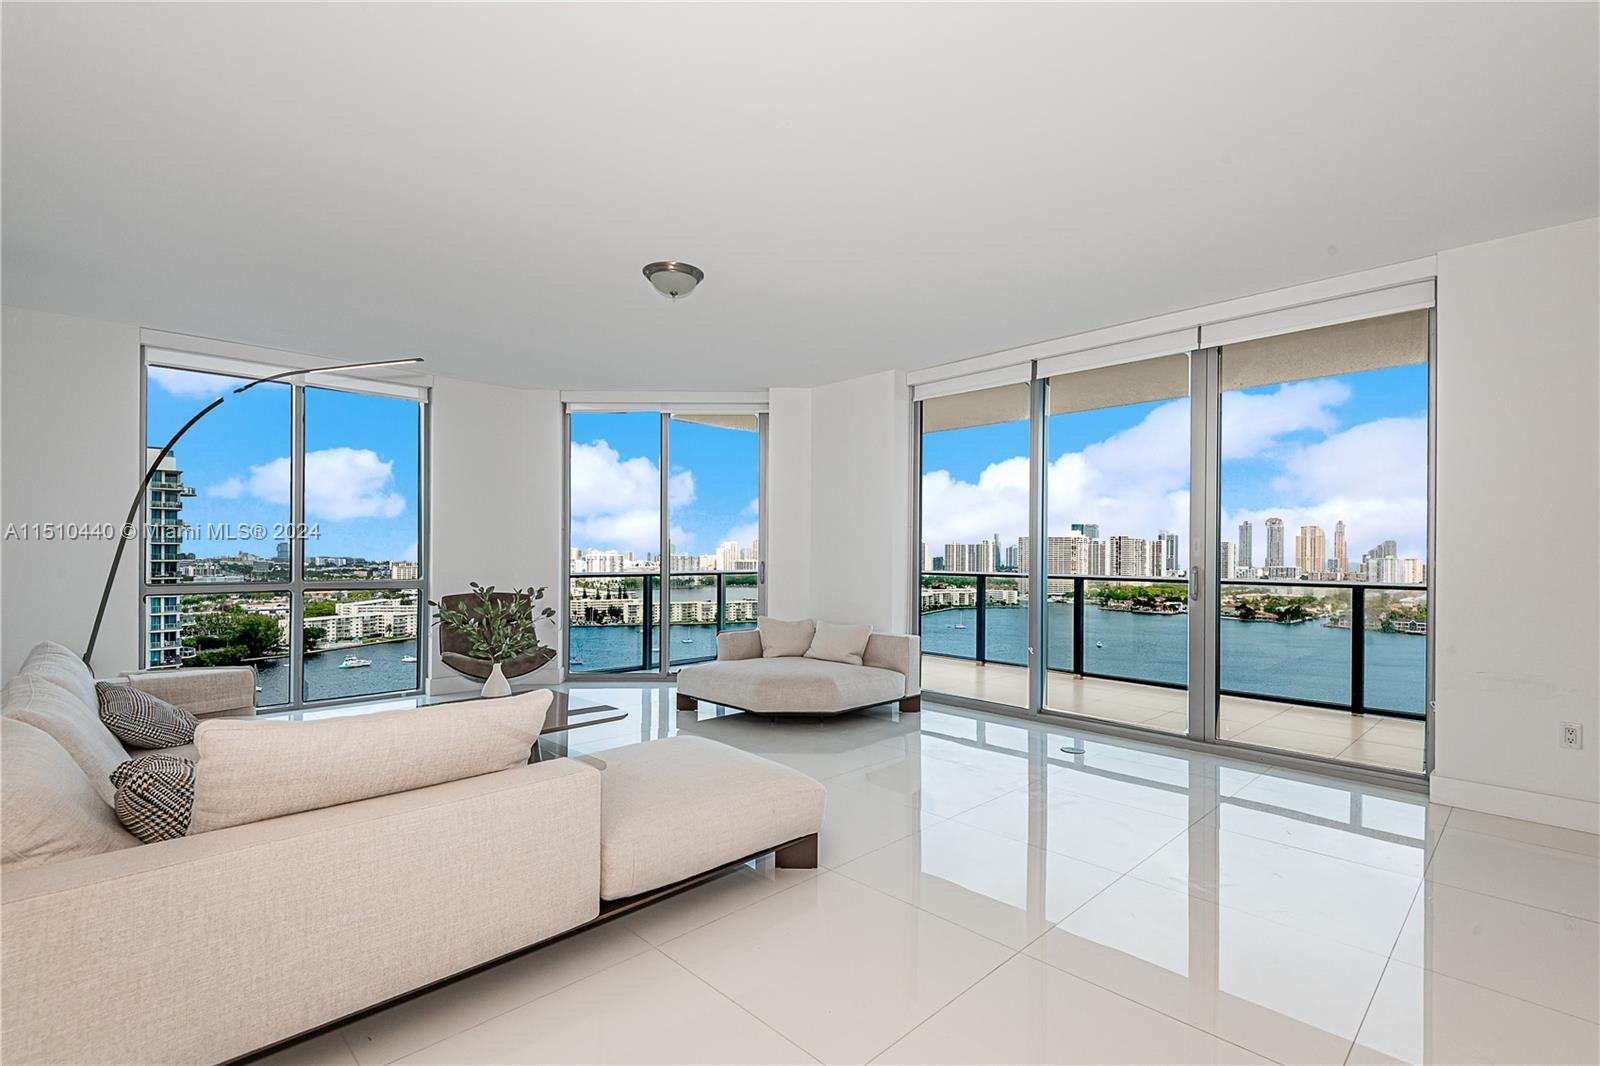 Property for Sale at 17111 Biscayne Blvd 2109, North Miami Beach, Miami-Dade County, Florida - Bedrooms: 3 
Bathrooms: 4  - $2,195,000